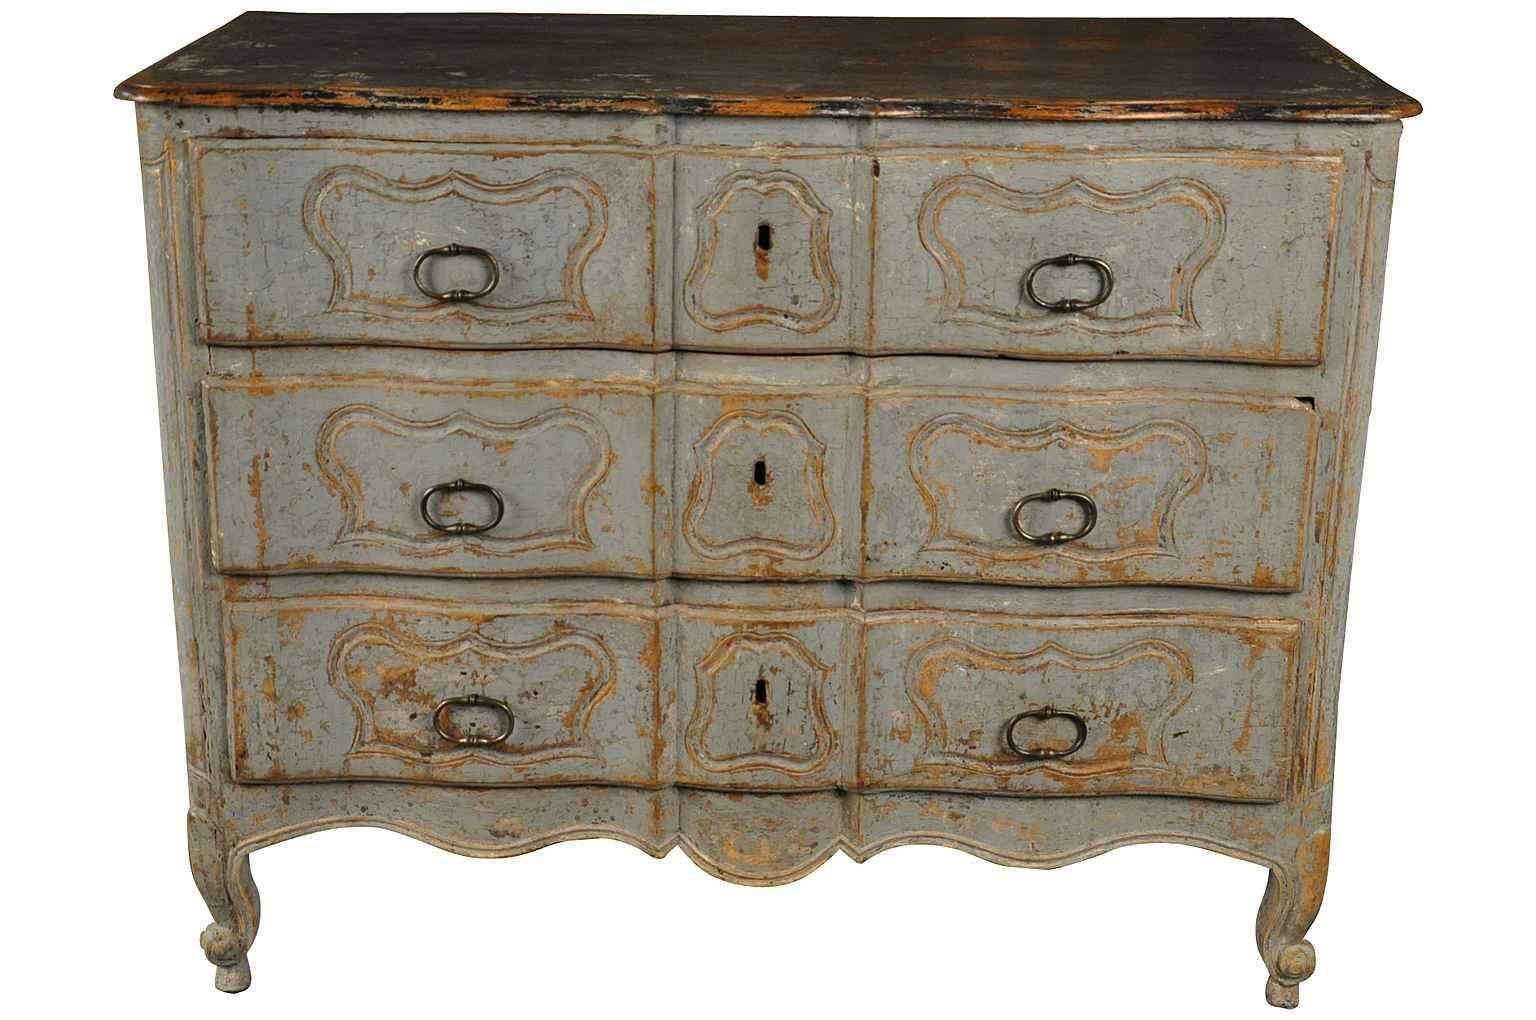 A very beautiful French 18th century commode in 